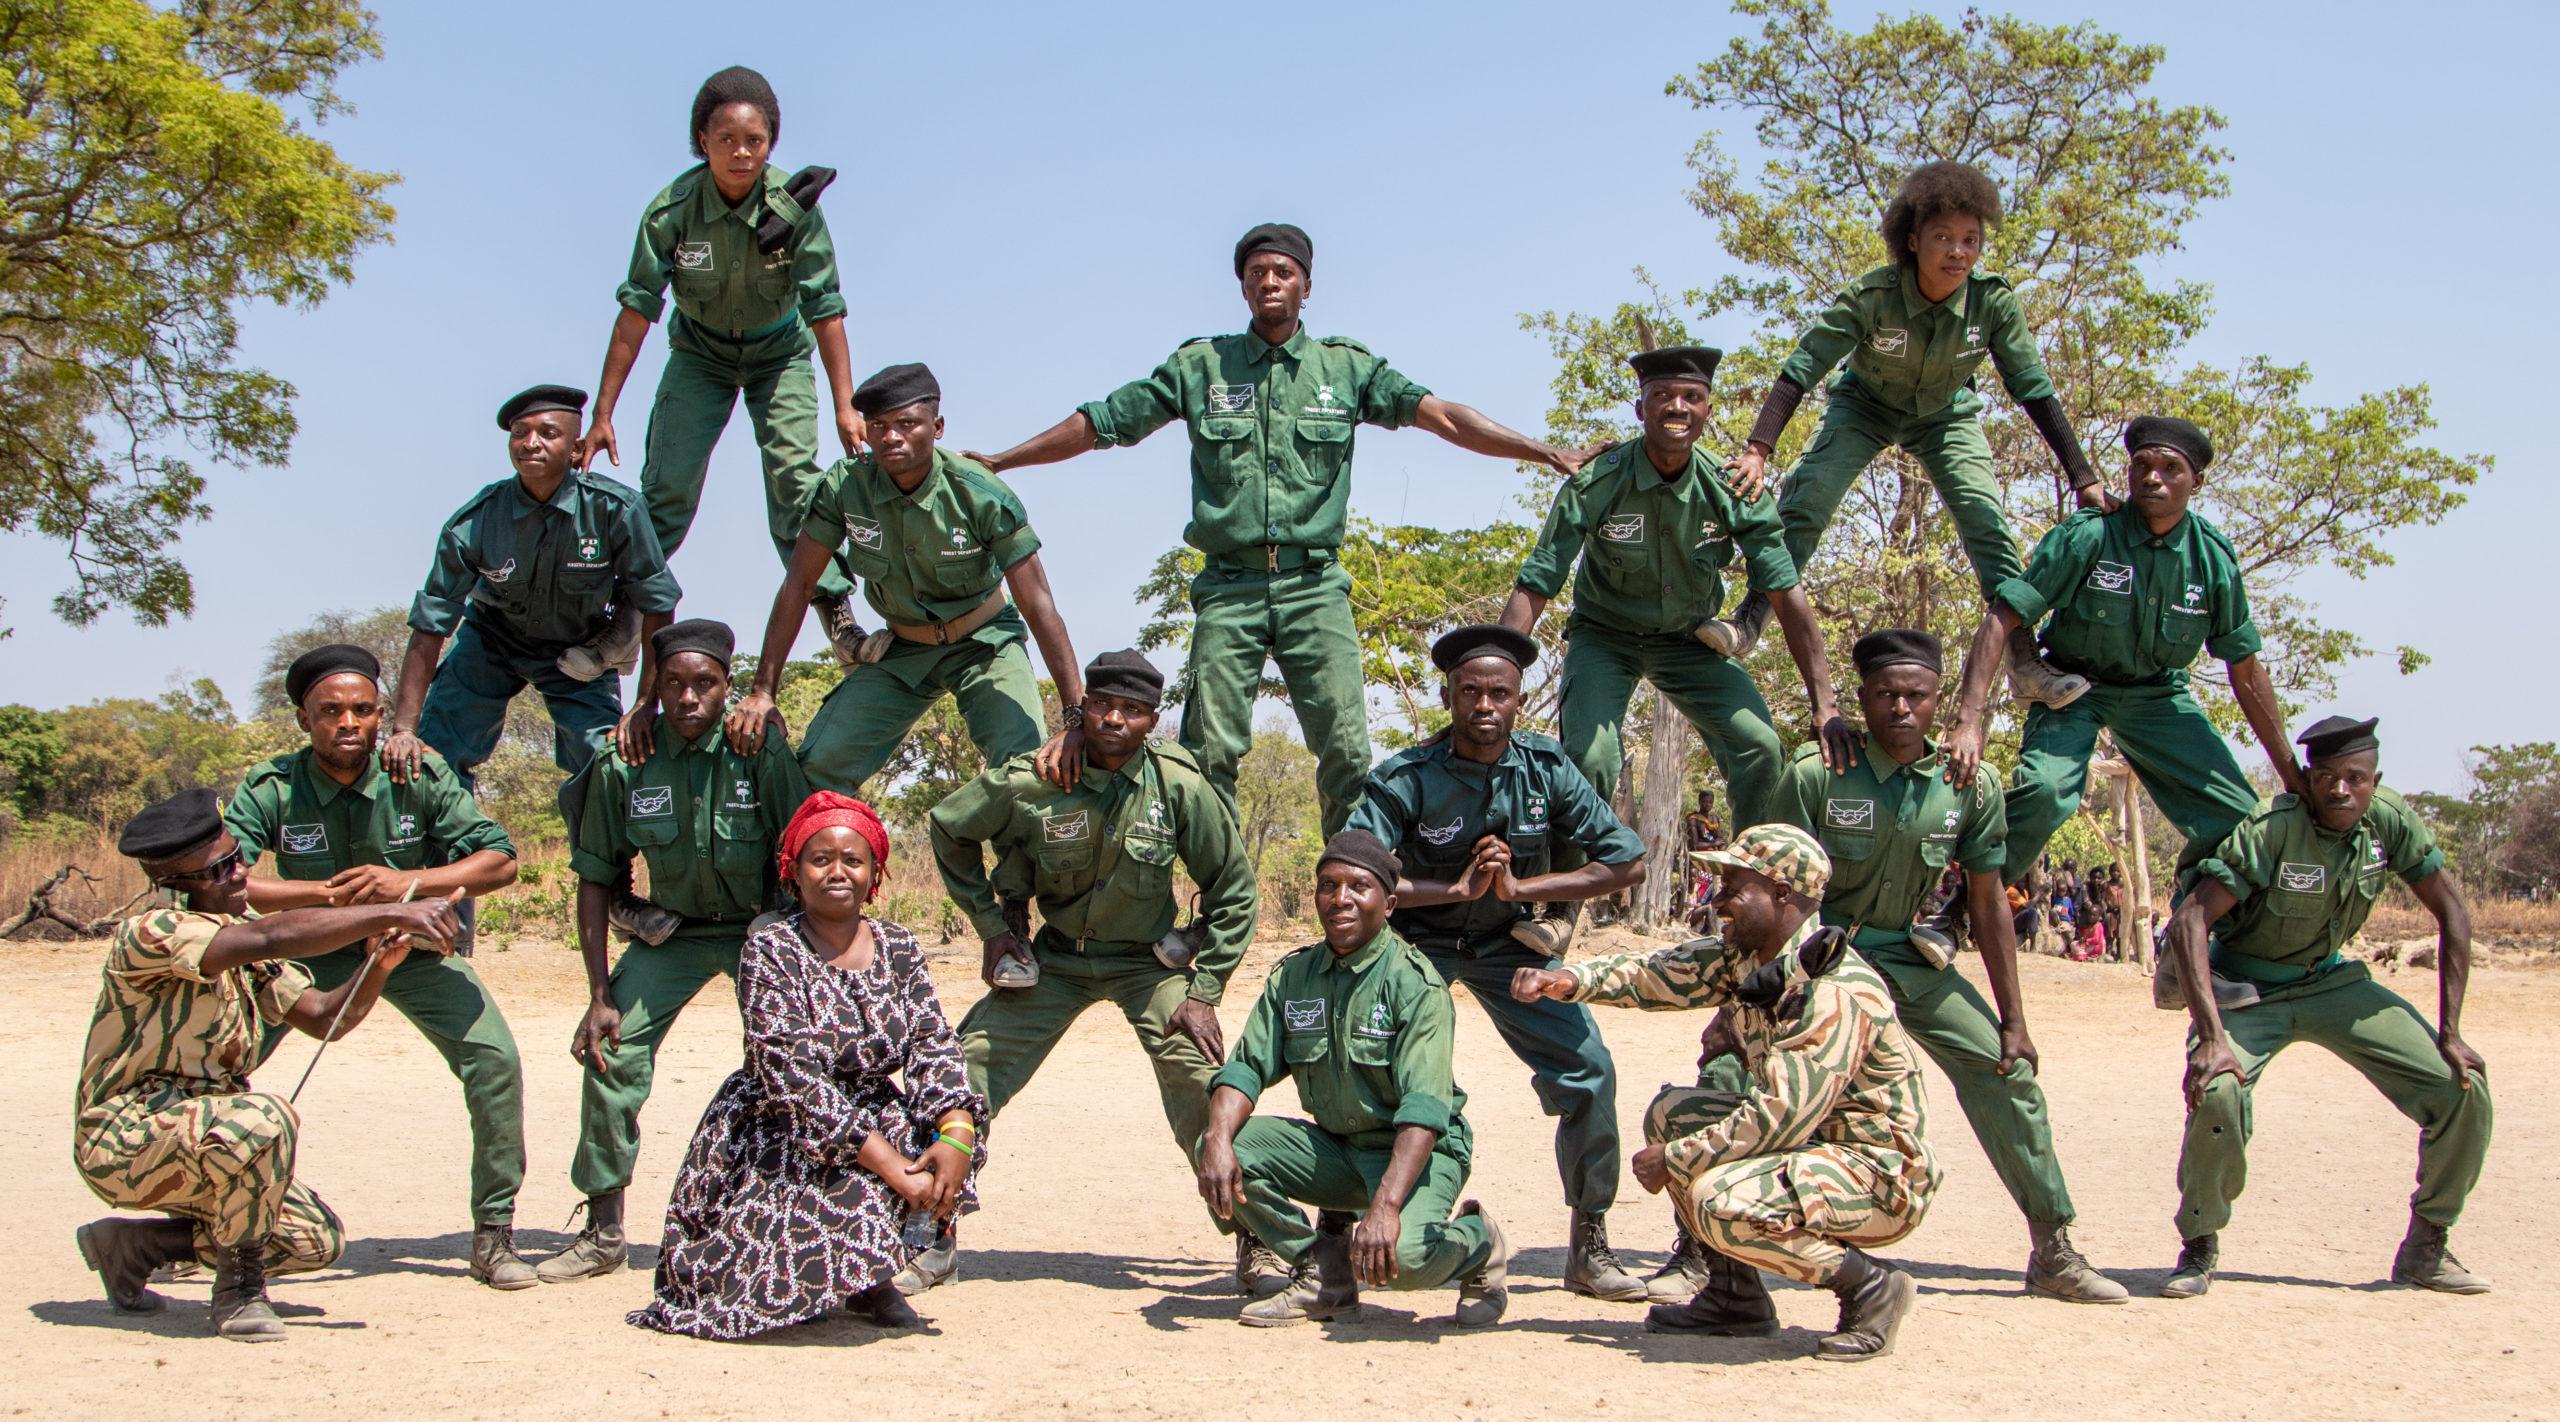 15 rangers have been trained and equipped to patrol the Forest Reserve. © Ruben Foquet, WeForest